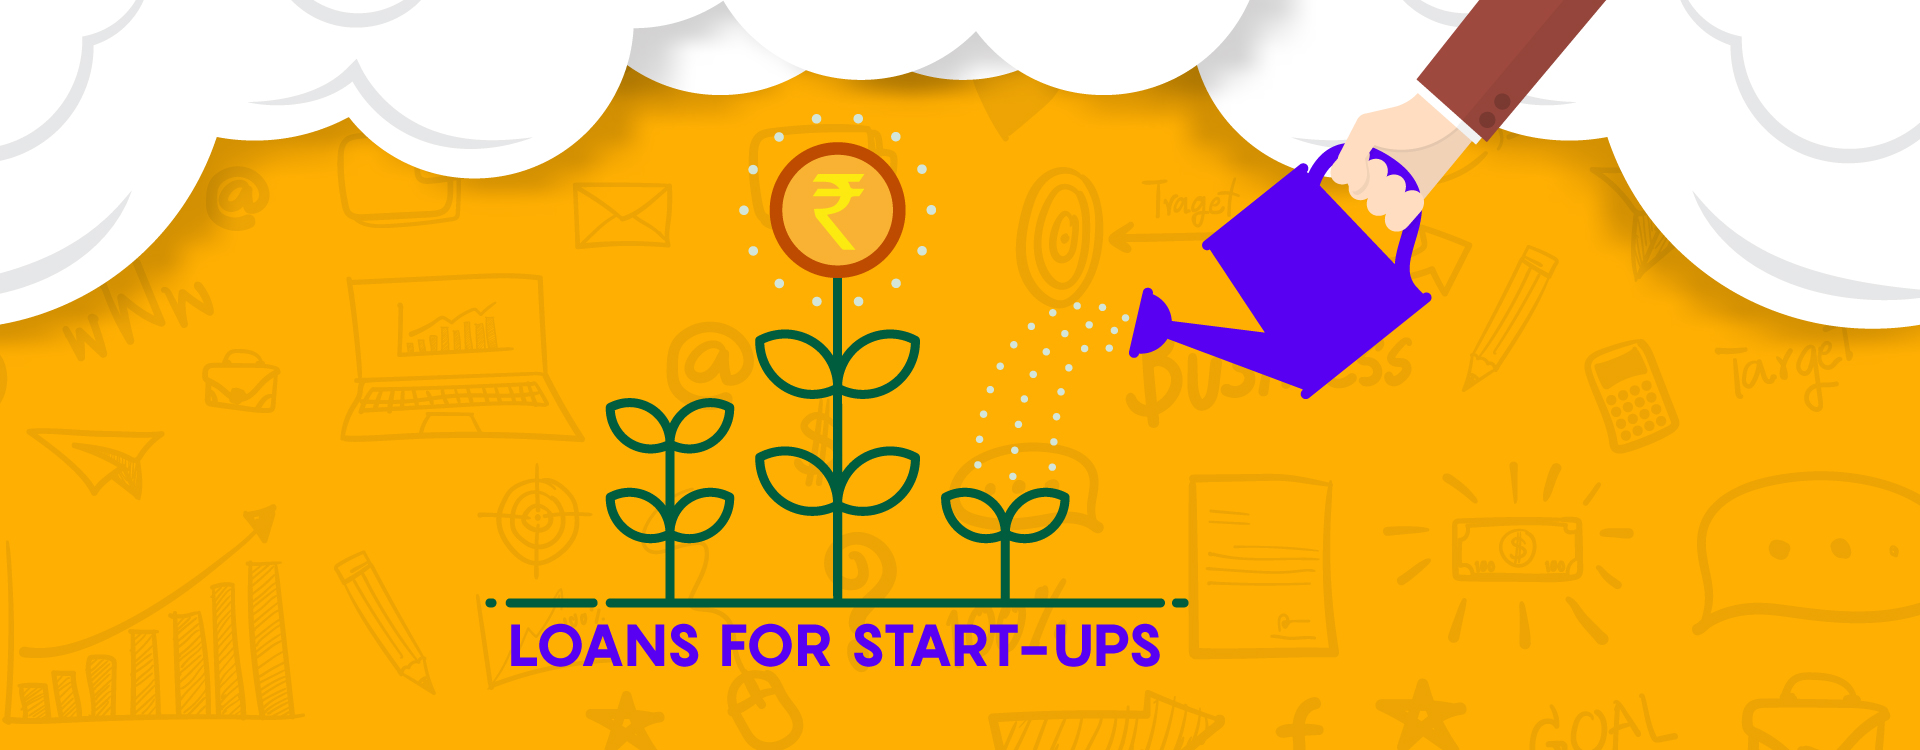 Loan for Start-ups and new businesses- how to get it?